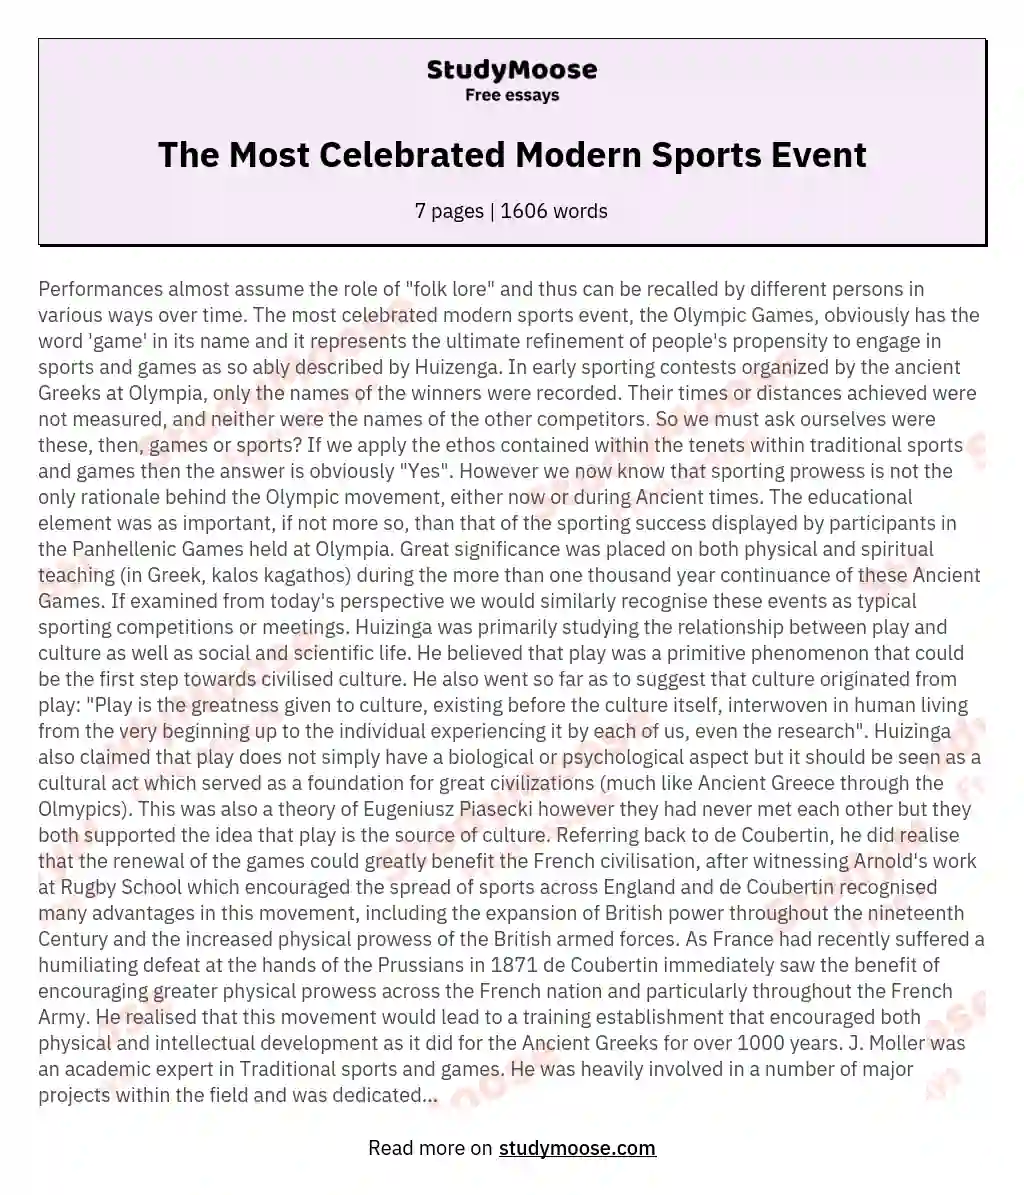 The Most Celebrated Modern Sports Event essay